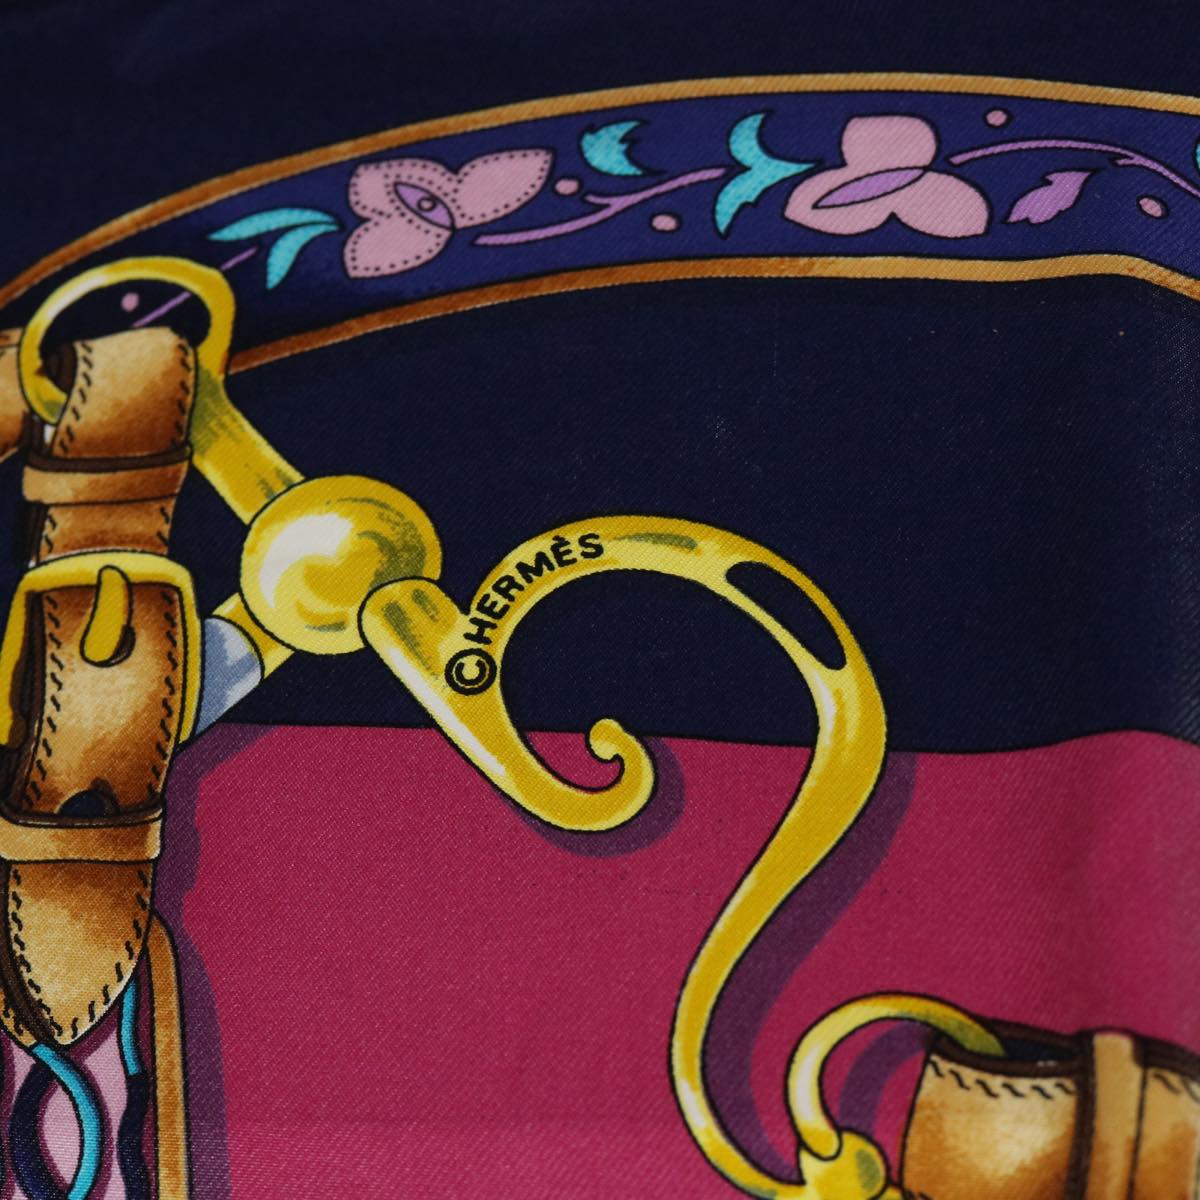 HERMES Carre 90 FESTIVAL Scarf Silk Pink Blue Auth bs8068